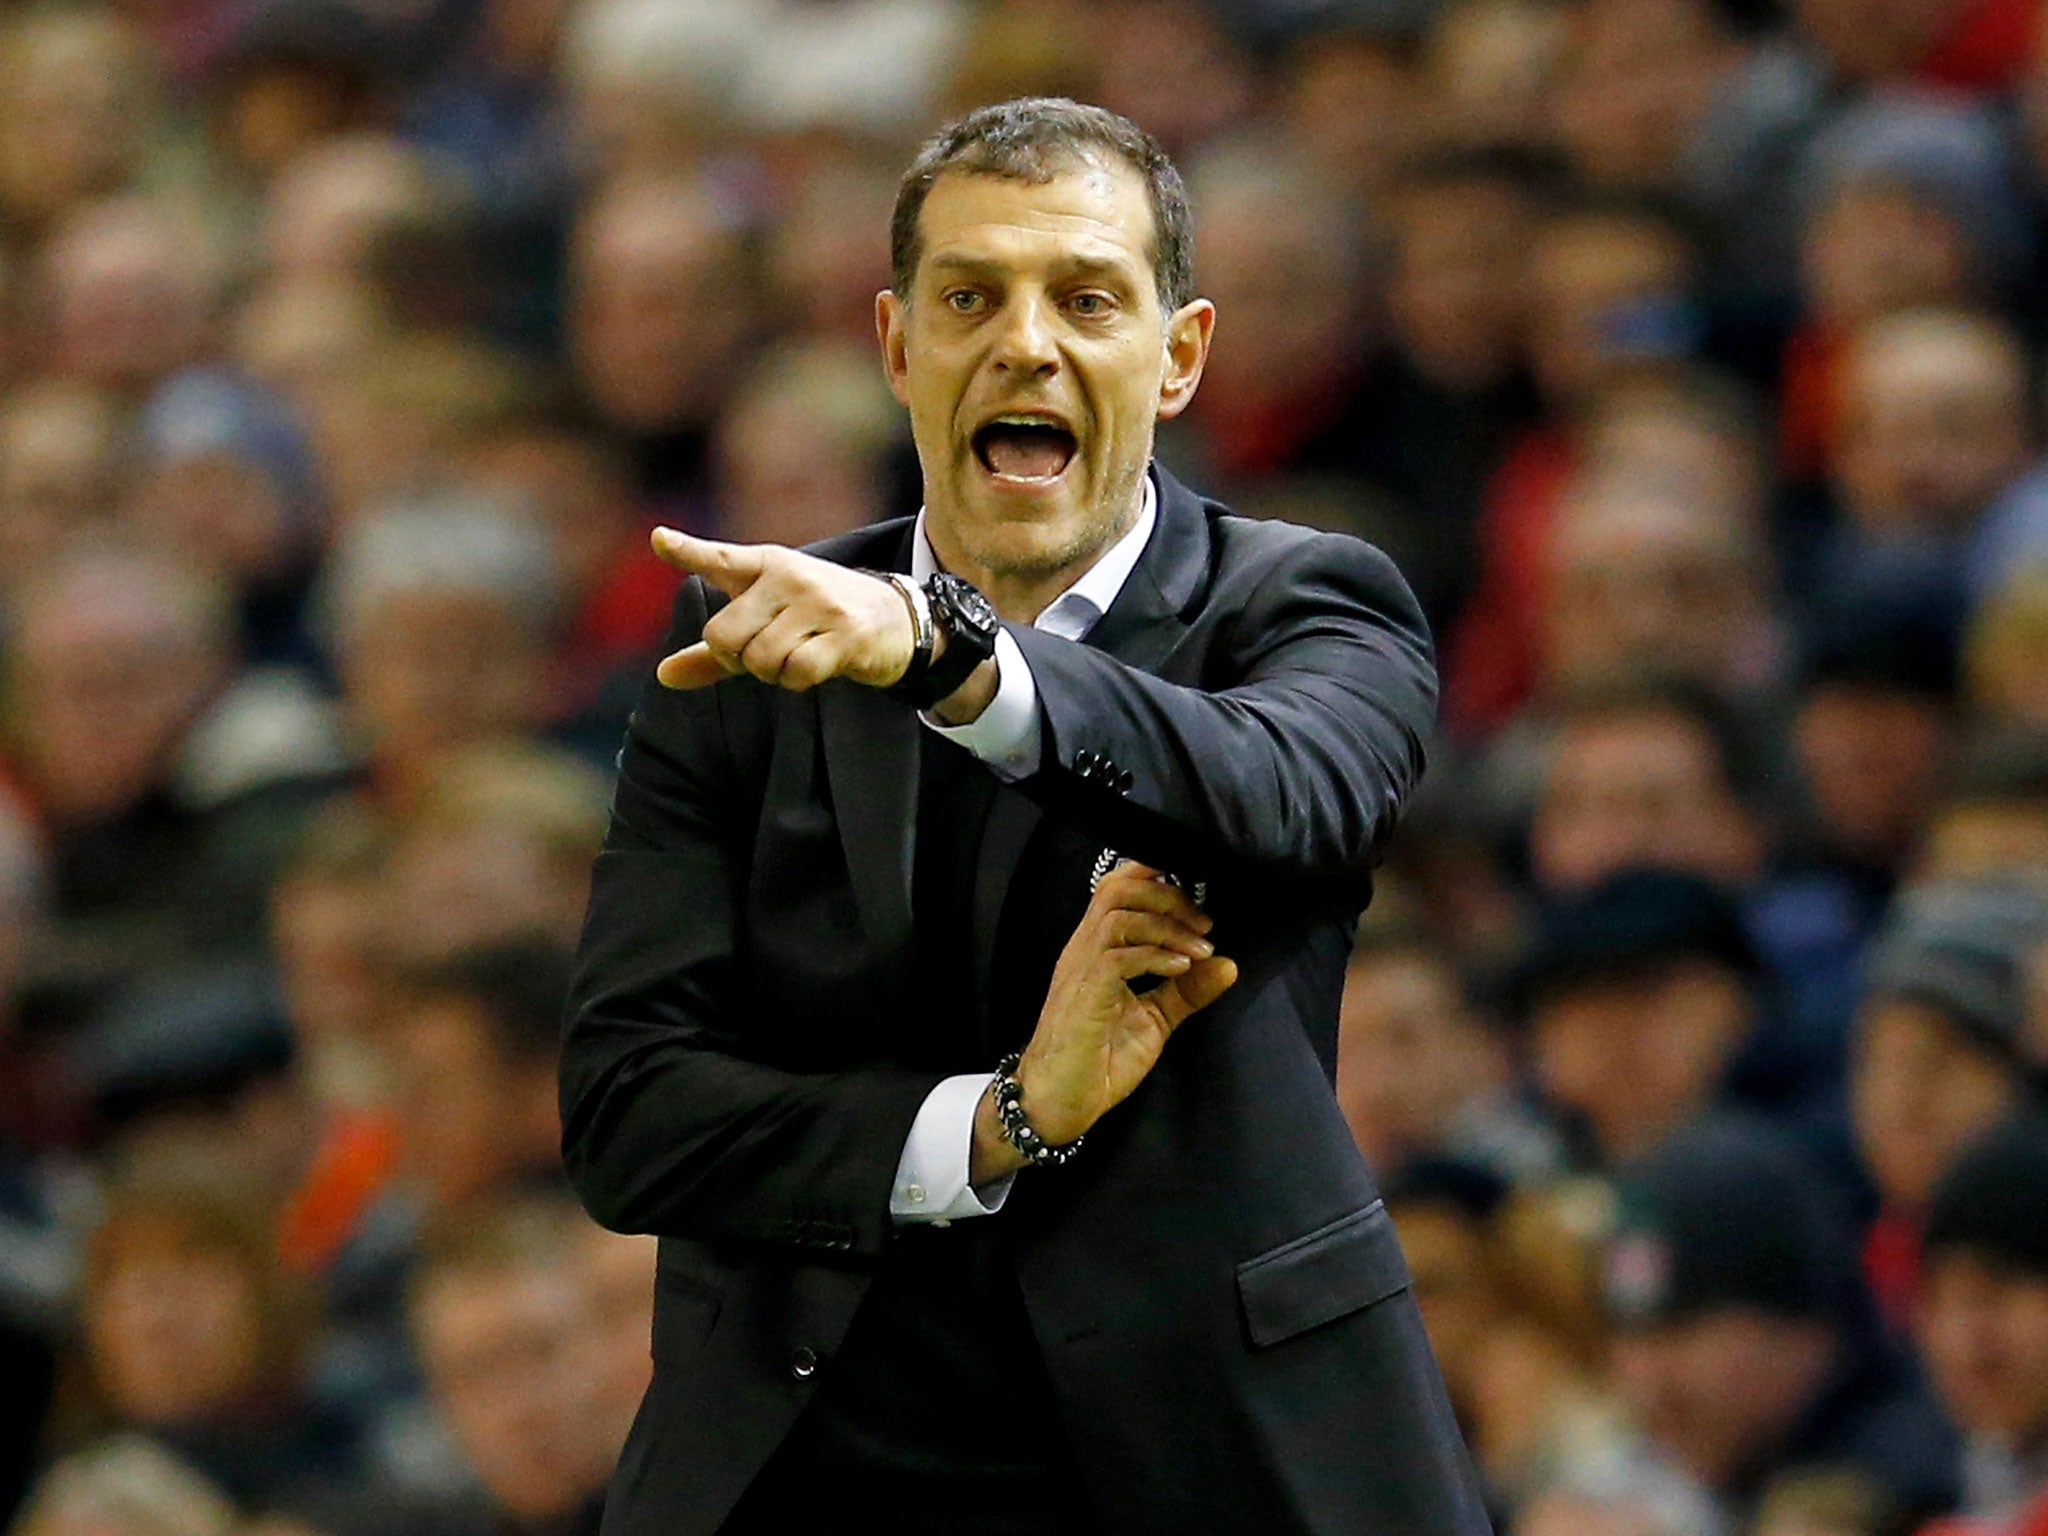 Slaven Bilic has been named the new Hammers manager